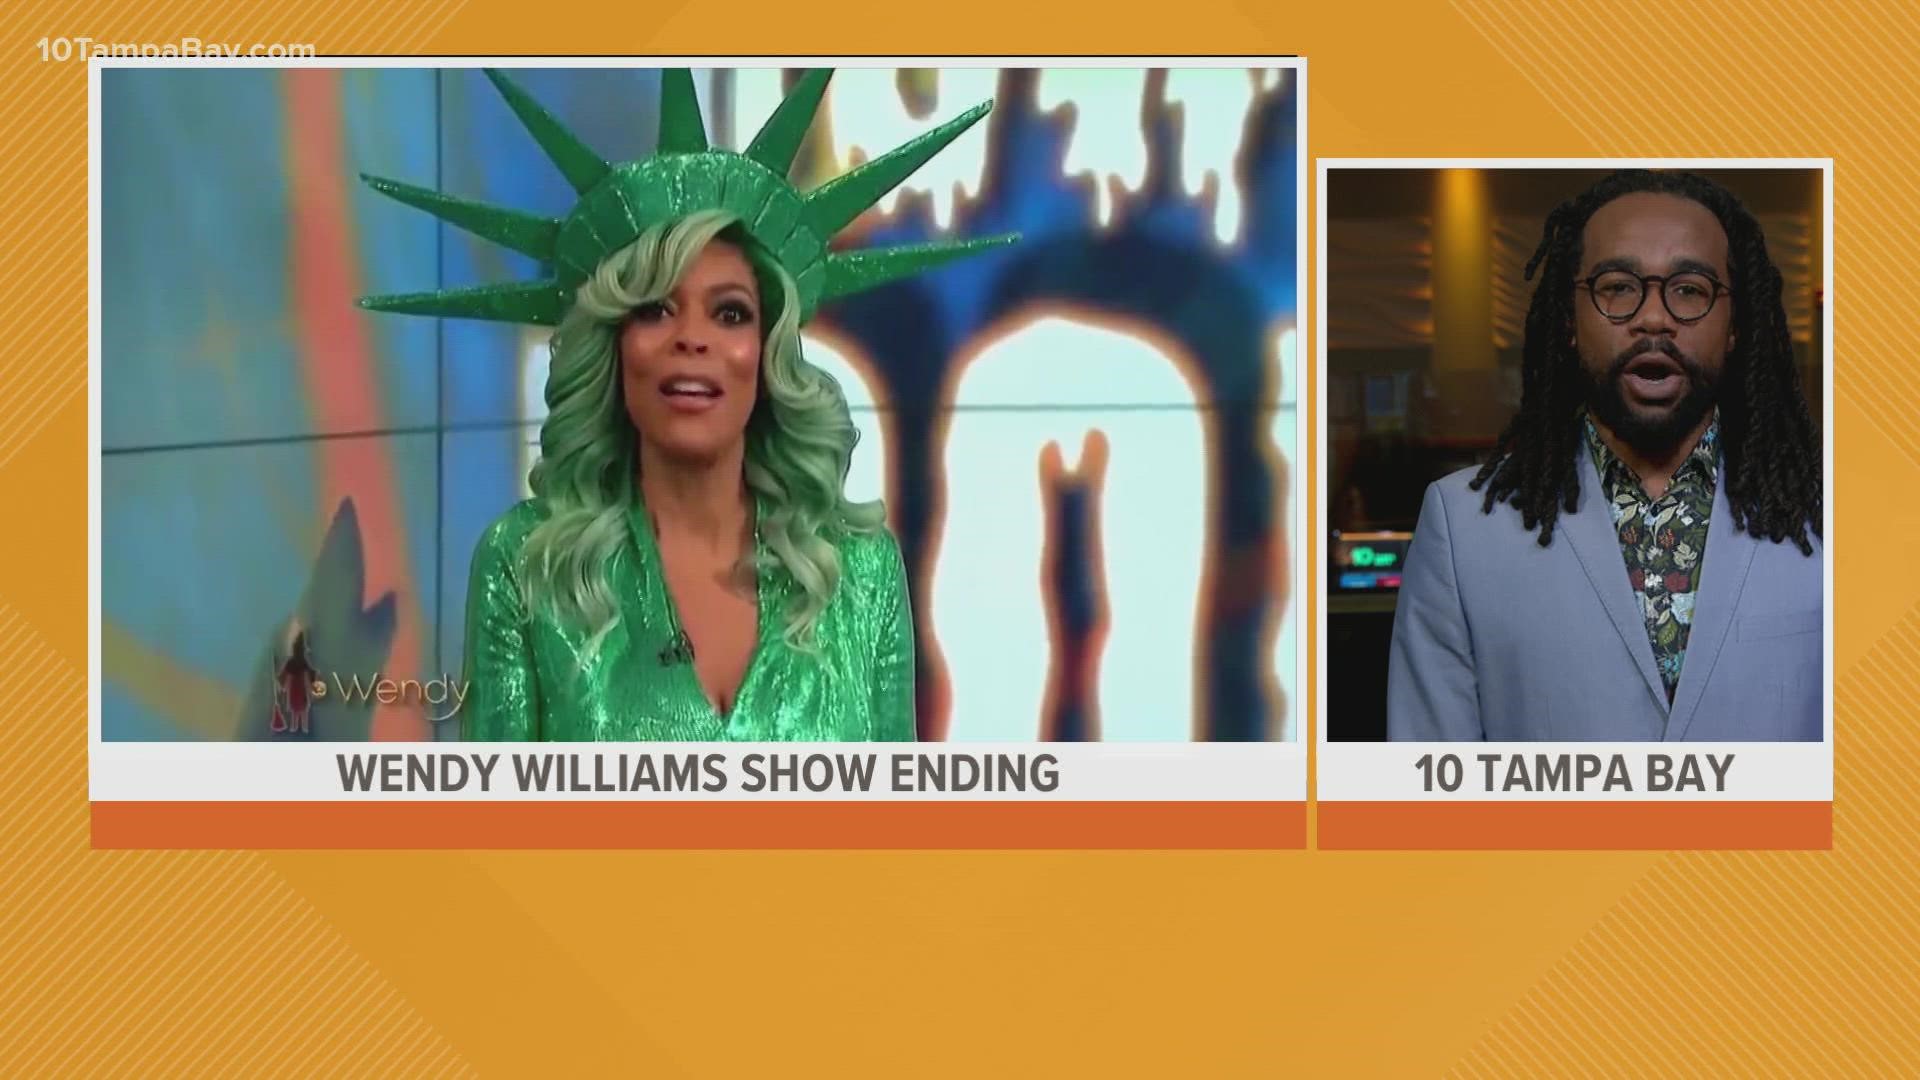 Wendy Williams has not been on her show since July 2021, due to health issues that she hasn't detailed.